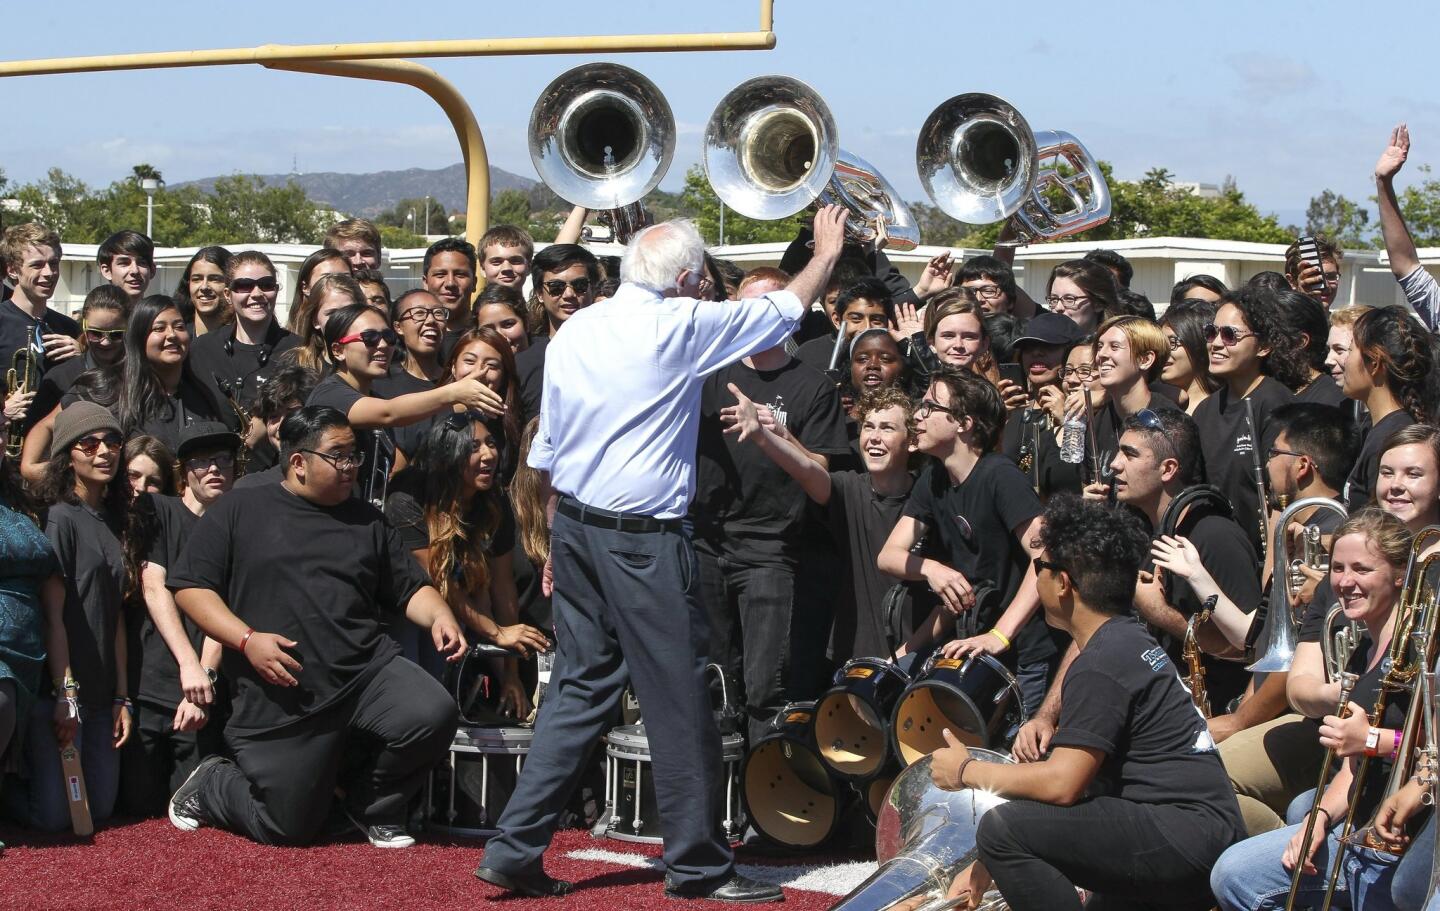 After speaking at a rally at the Rancho Buena Vista High School football stadium, Democratic presidential candidate Bernie Sanders waves to members of Rancho Buena Vista's marching band, called Rhythm of the Ranch, after he posed for a picture with them